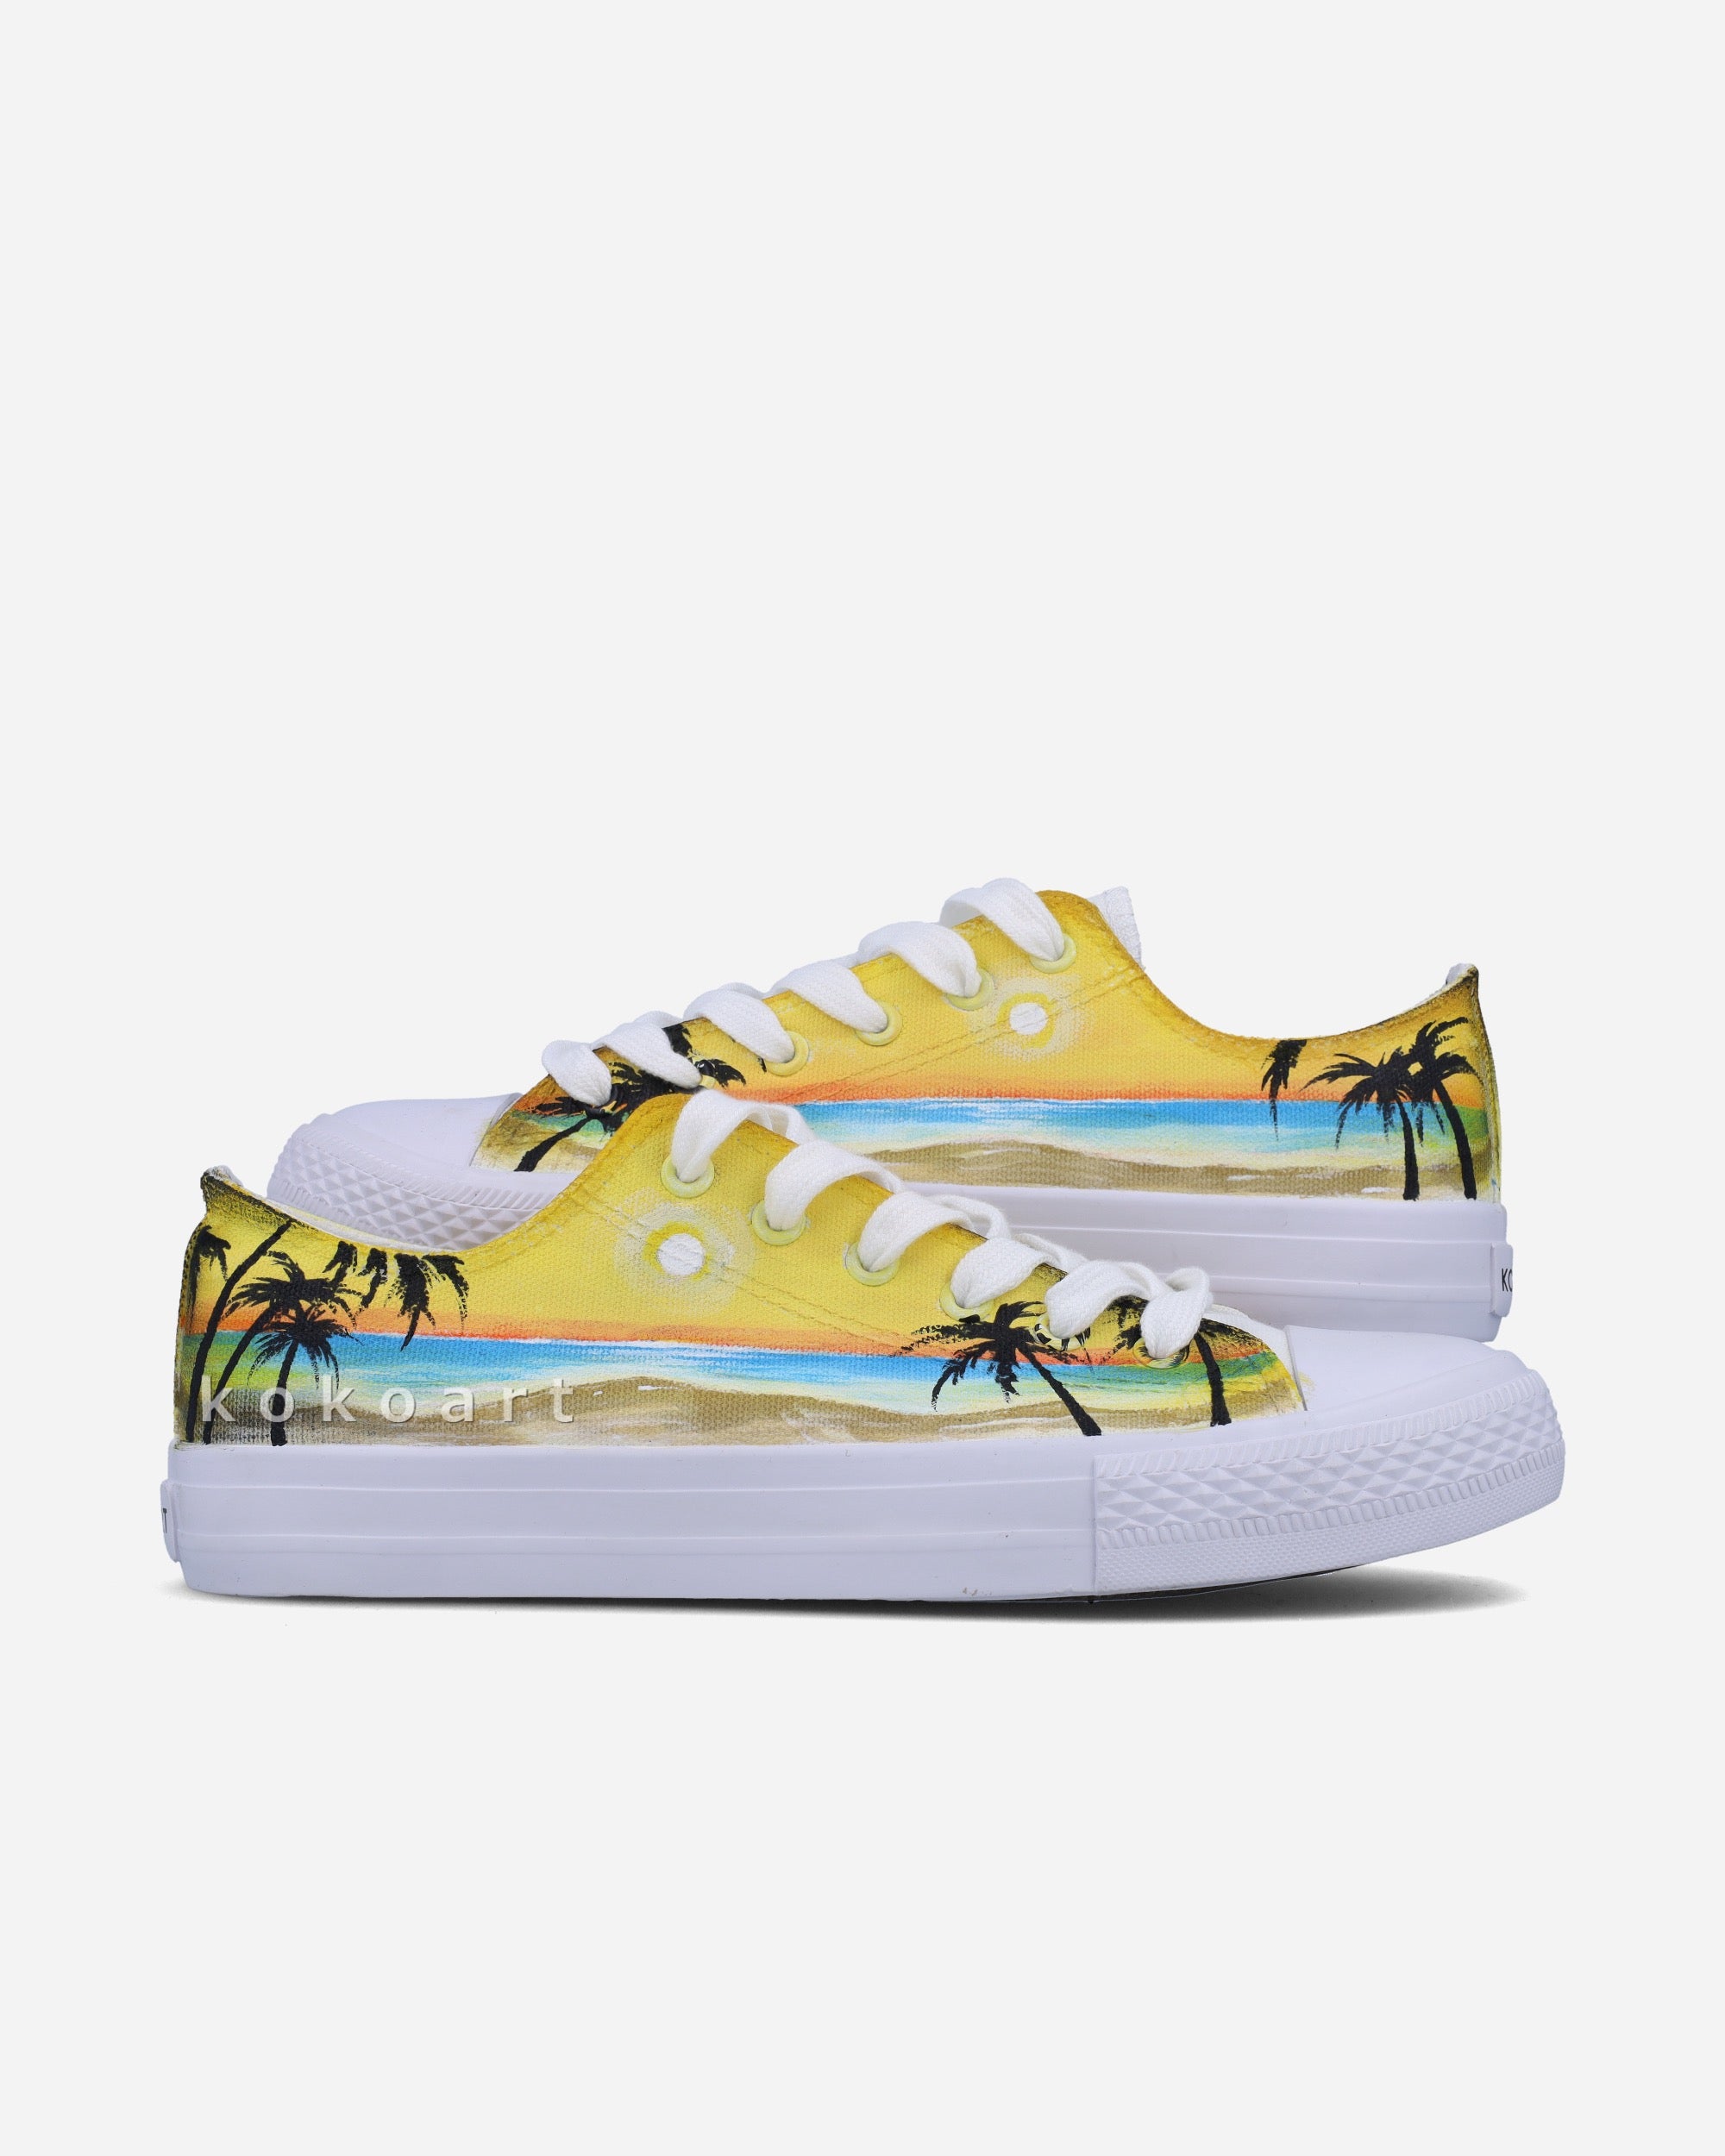 Sunset Beach with Palm Trees Hand Painted Shoes